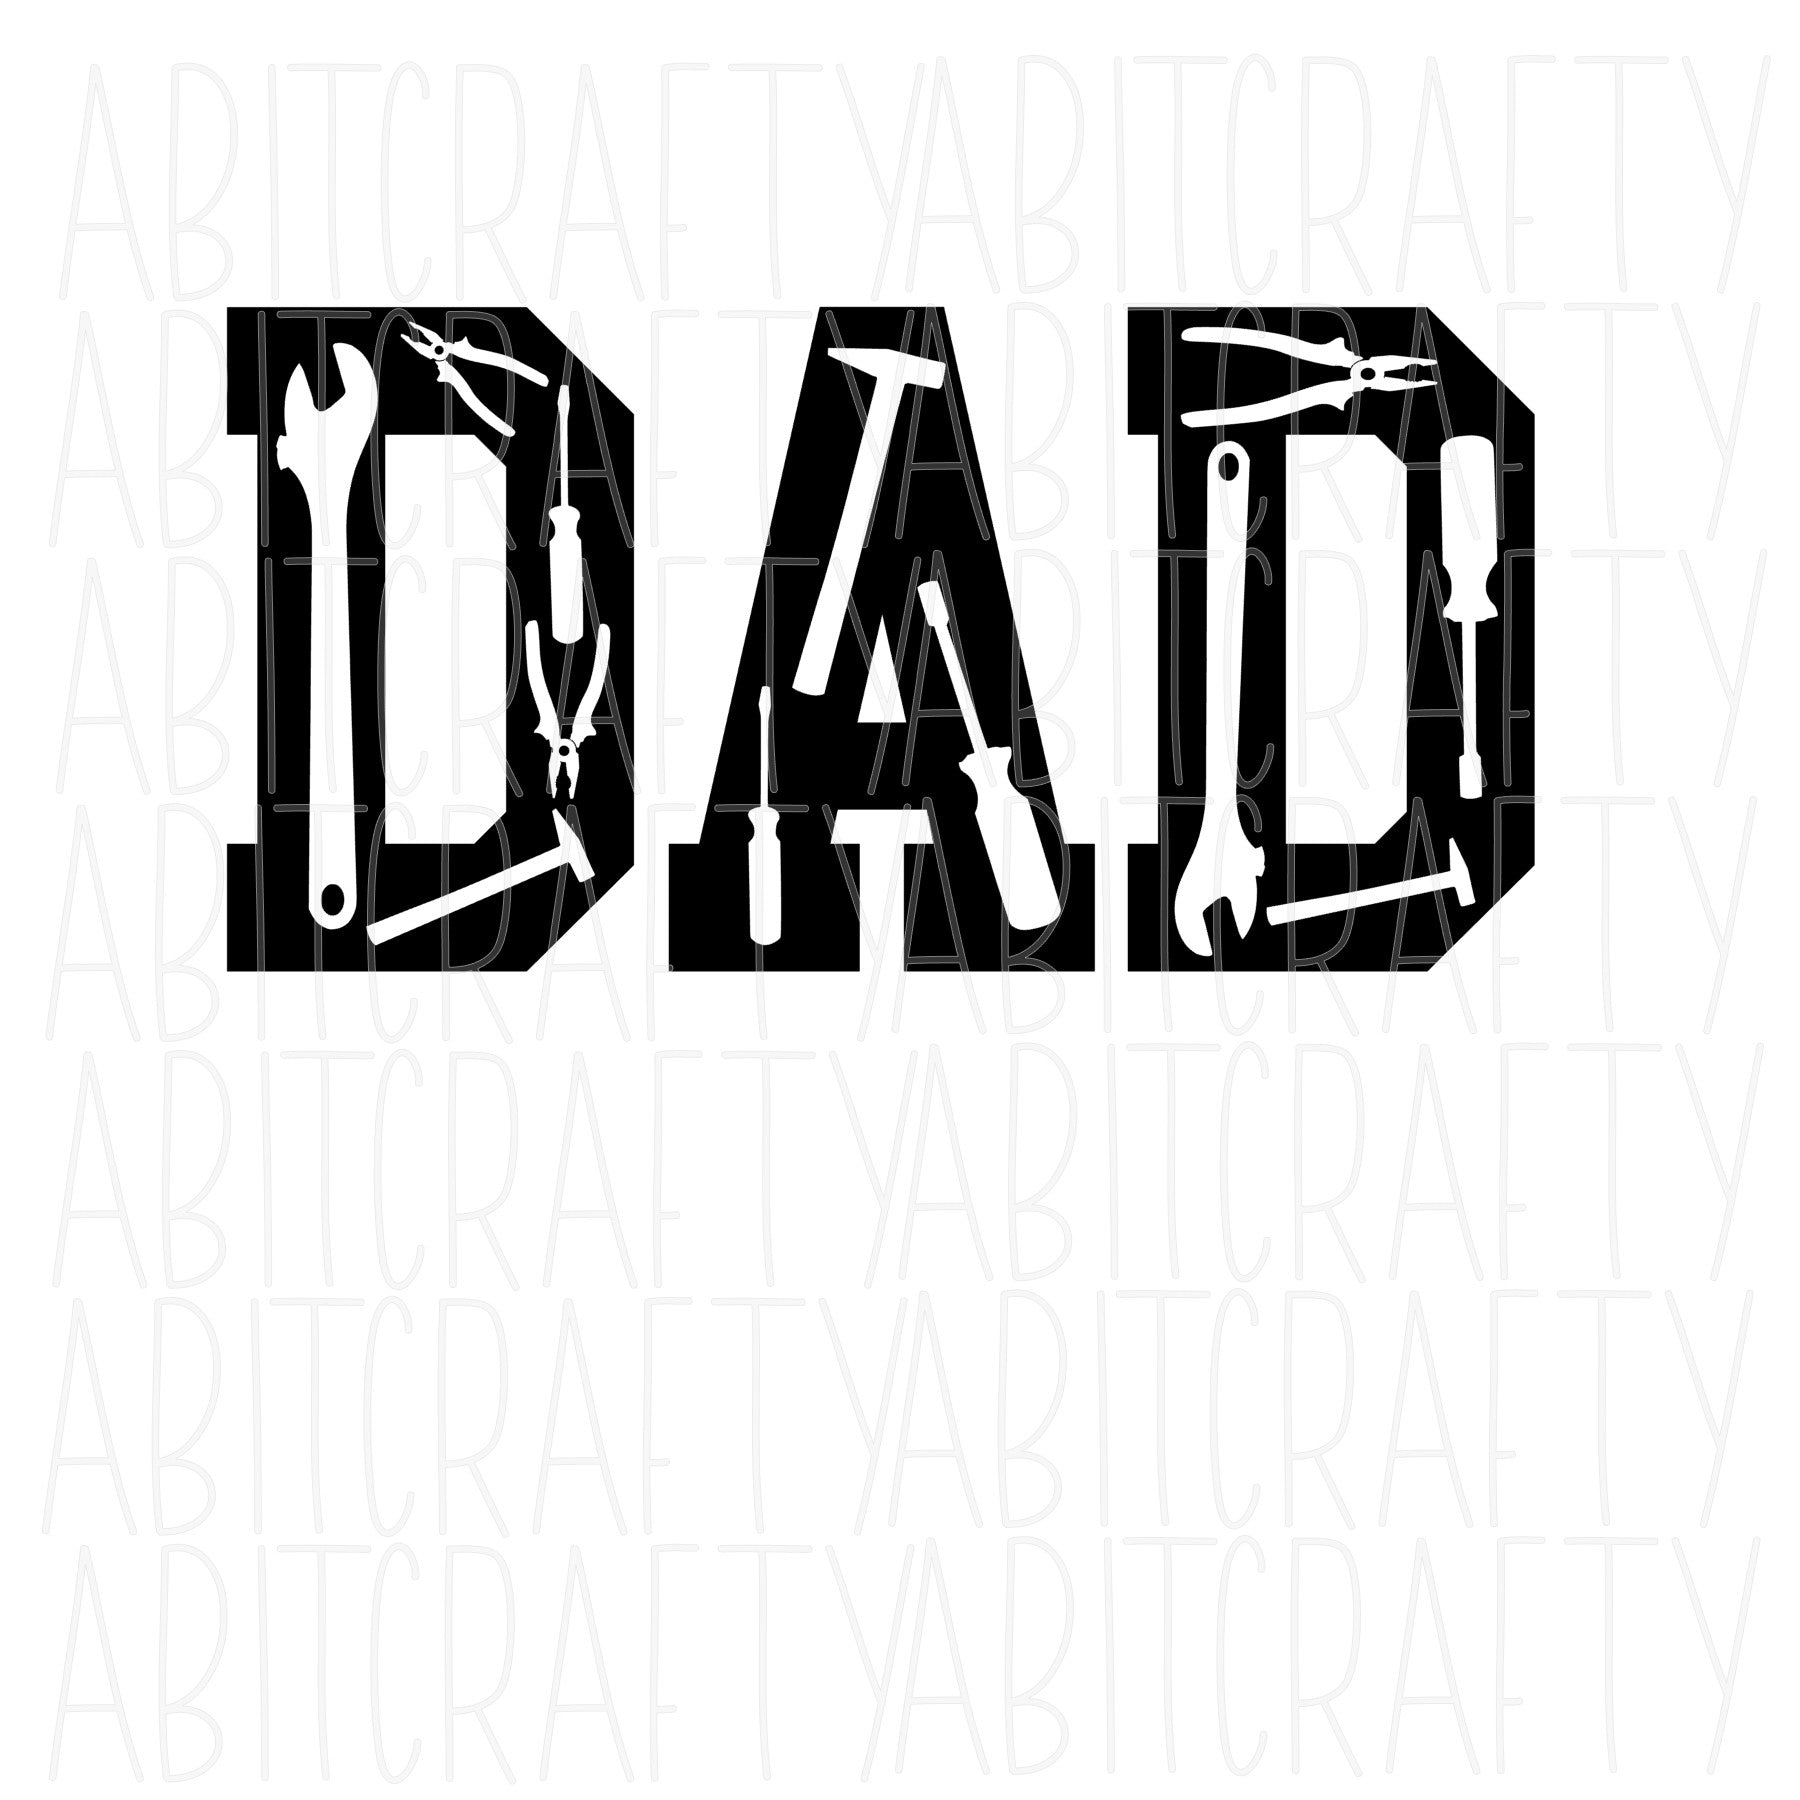 40+ FREE DAD SVG Files For Cricut PNG, VECTOR, LOGO & MORE! – 8SVG